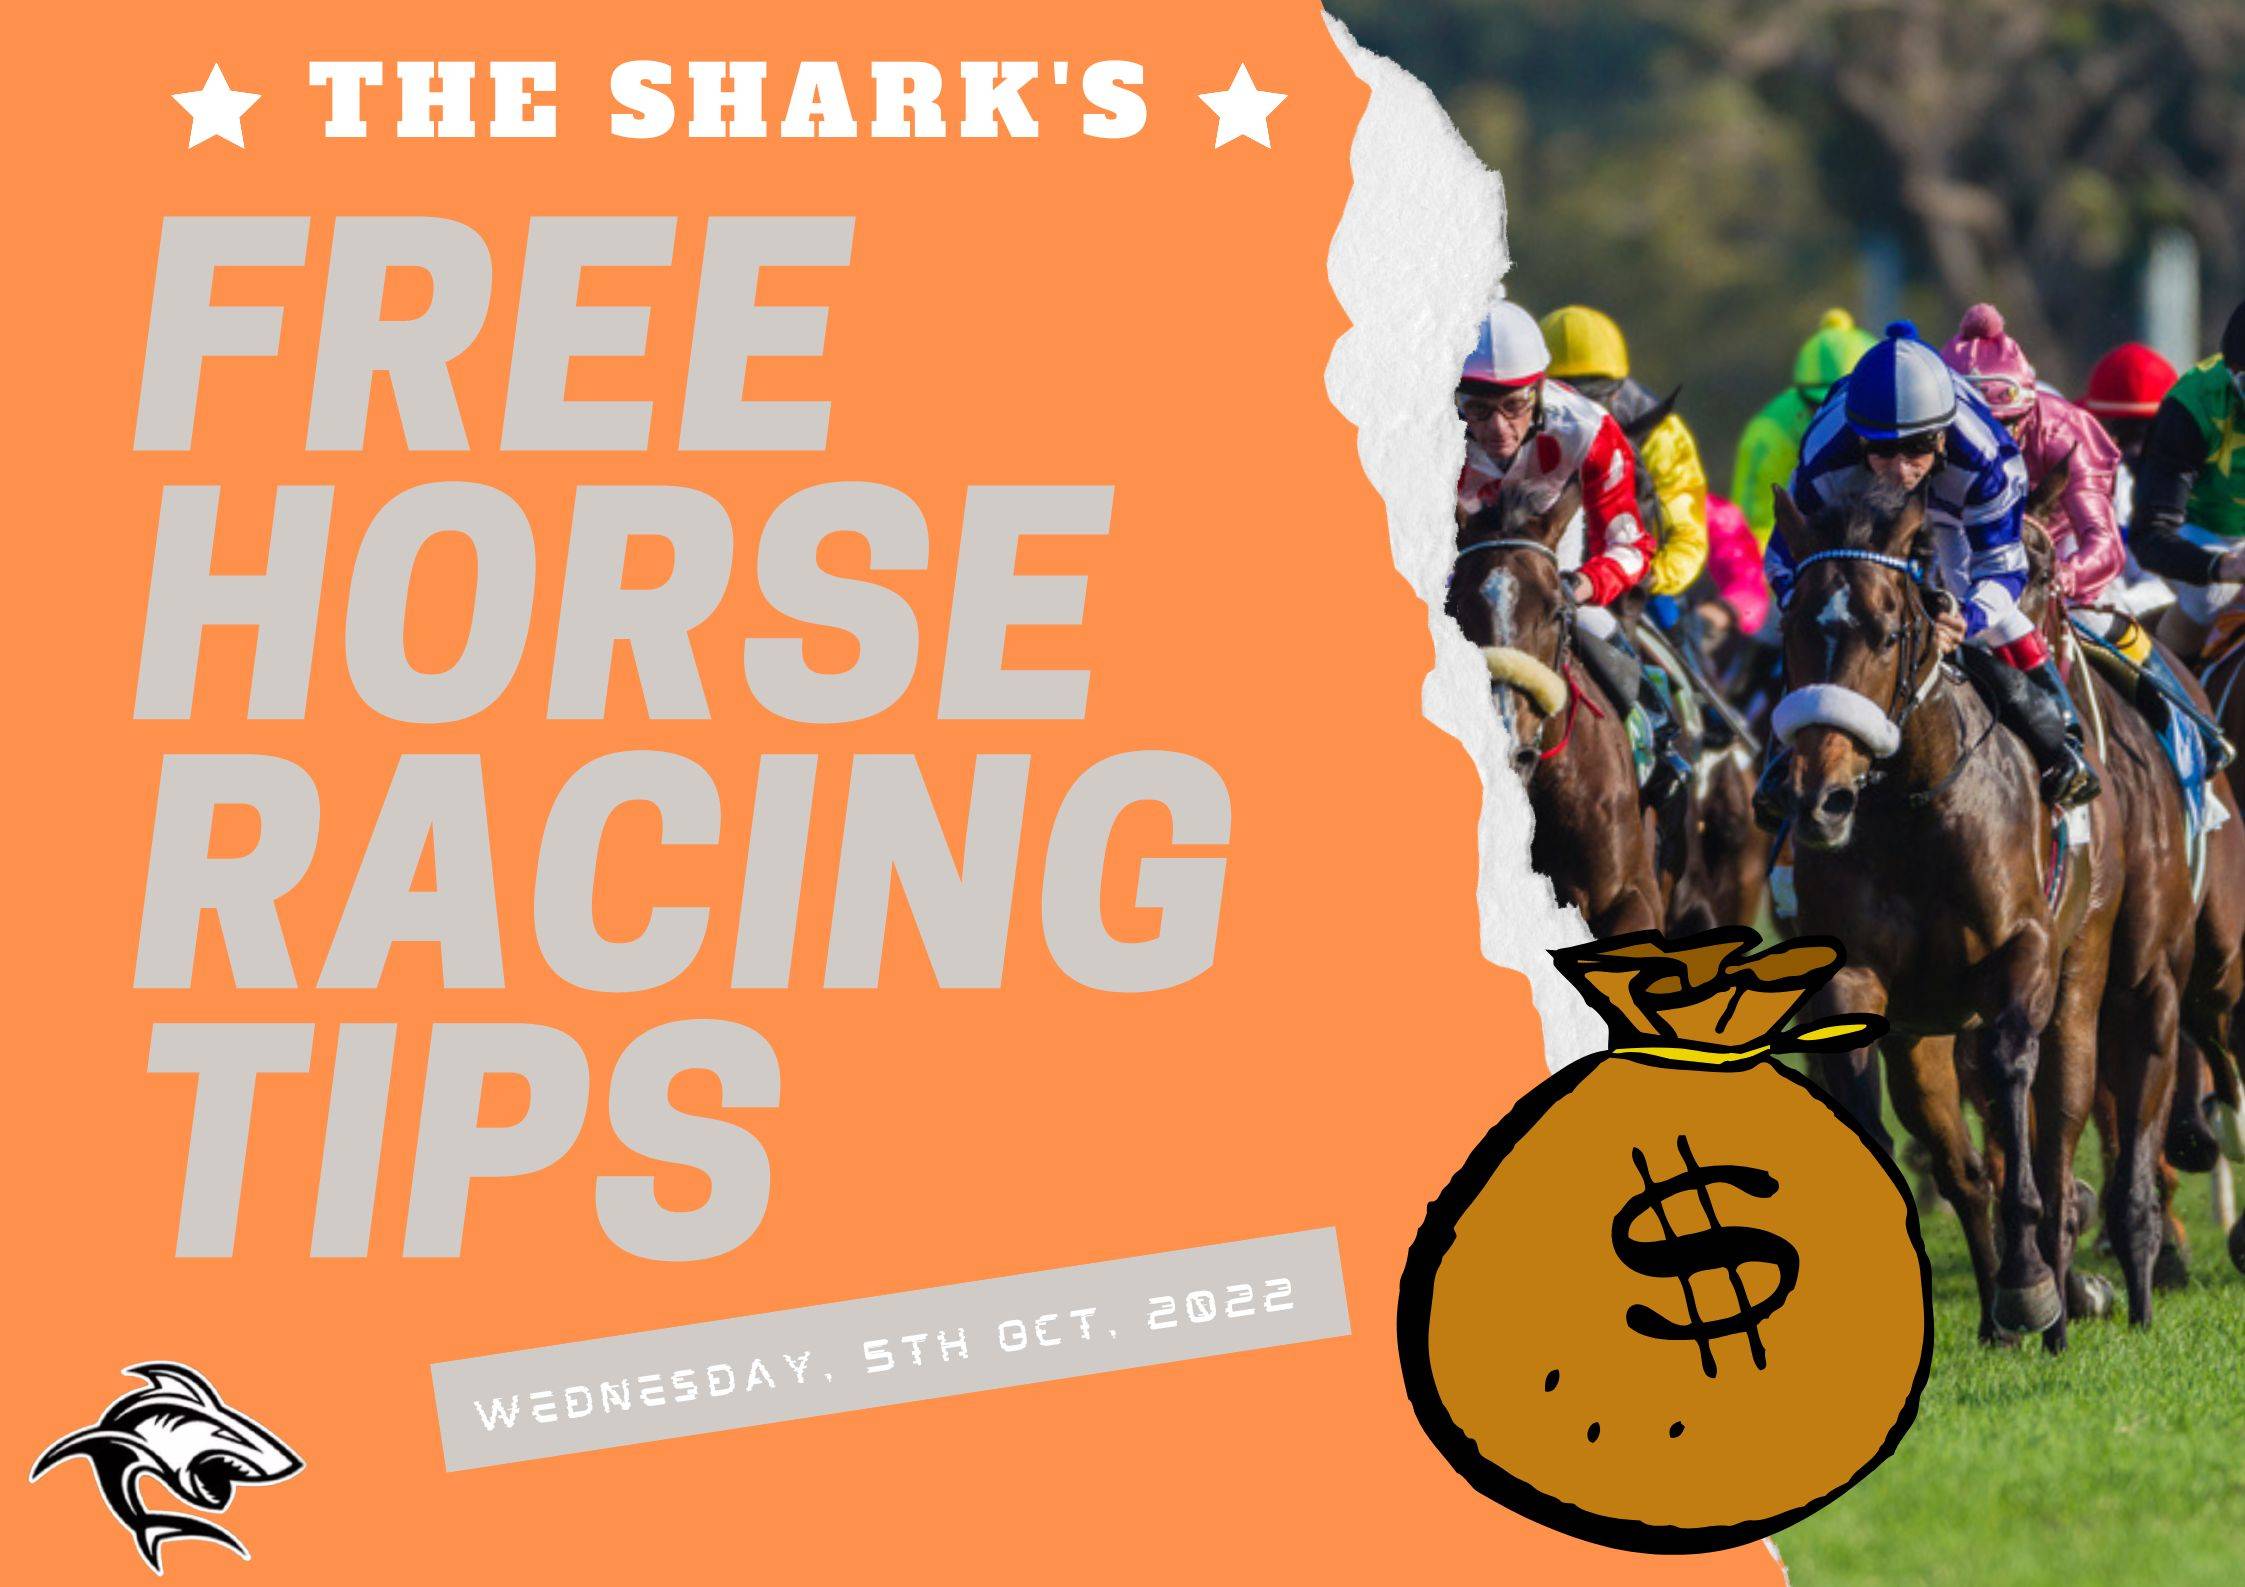 Free Horse Racing Tips - 5th Oct